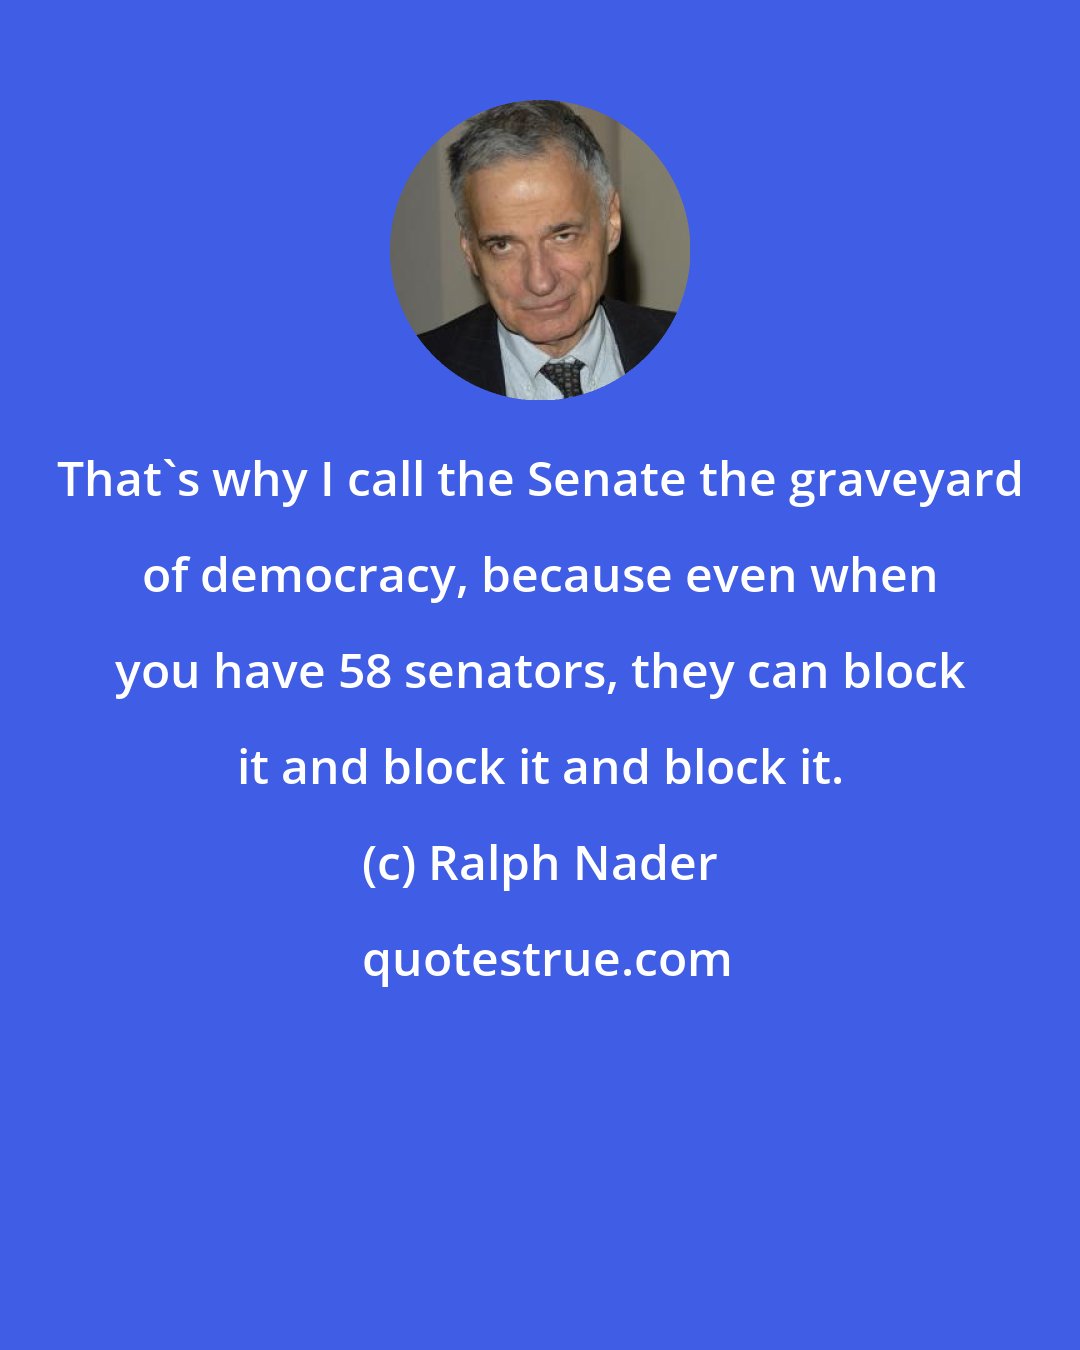 Ralph Nader: That's why I call the Senate the graveyard of democracy, because even when you have 58 senators, they can block it and block it and block it.